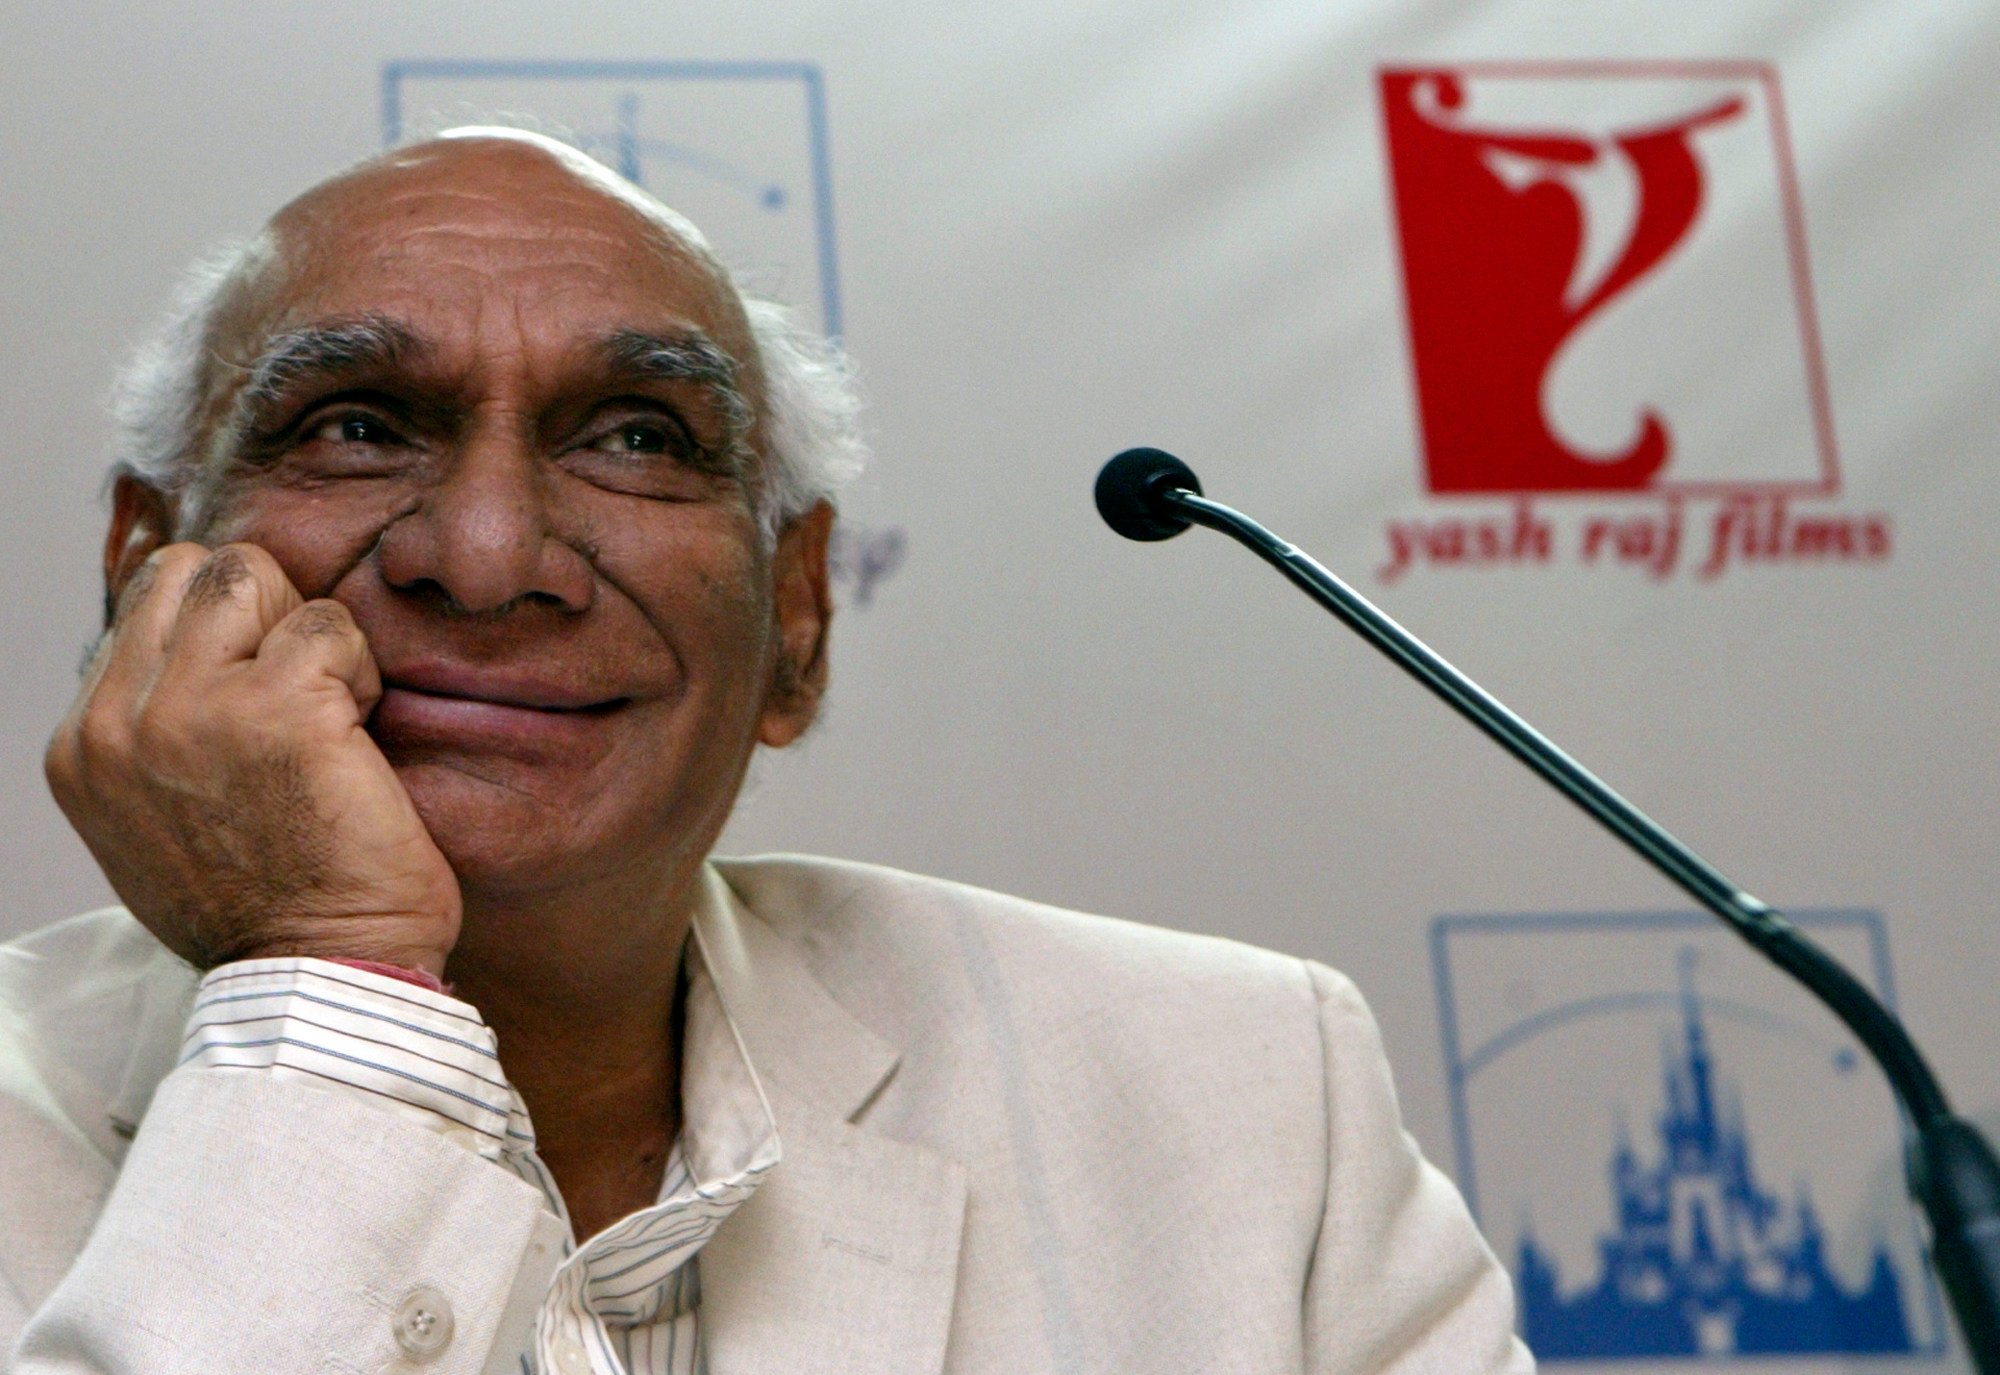 Yash Chopra during a press conference in Mumbai, India, in 2007. File photo: AP